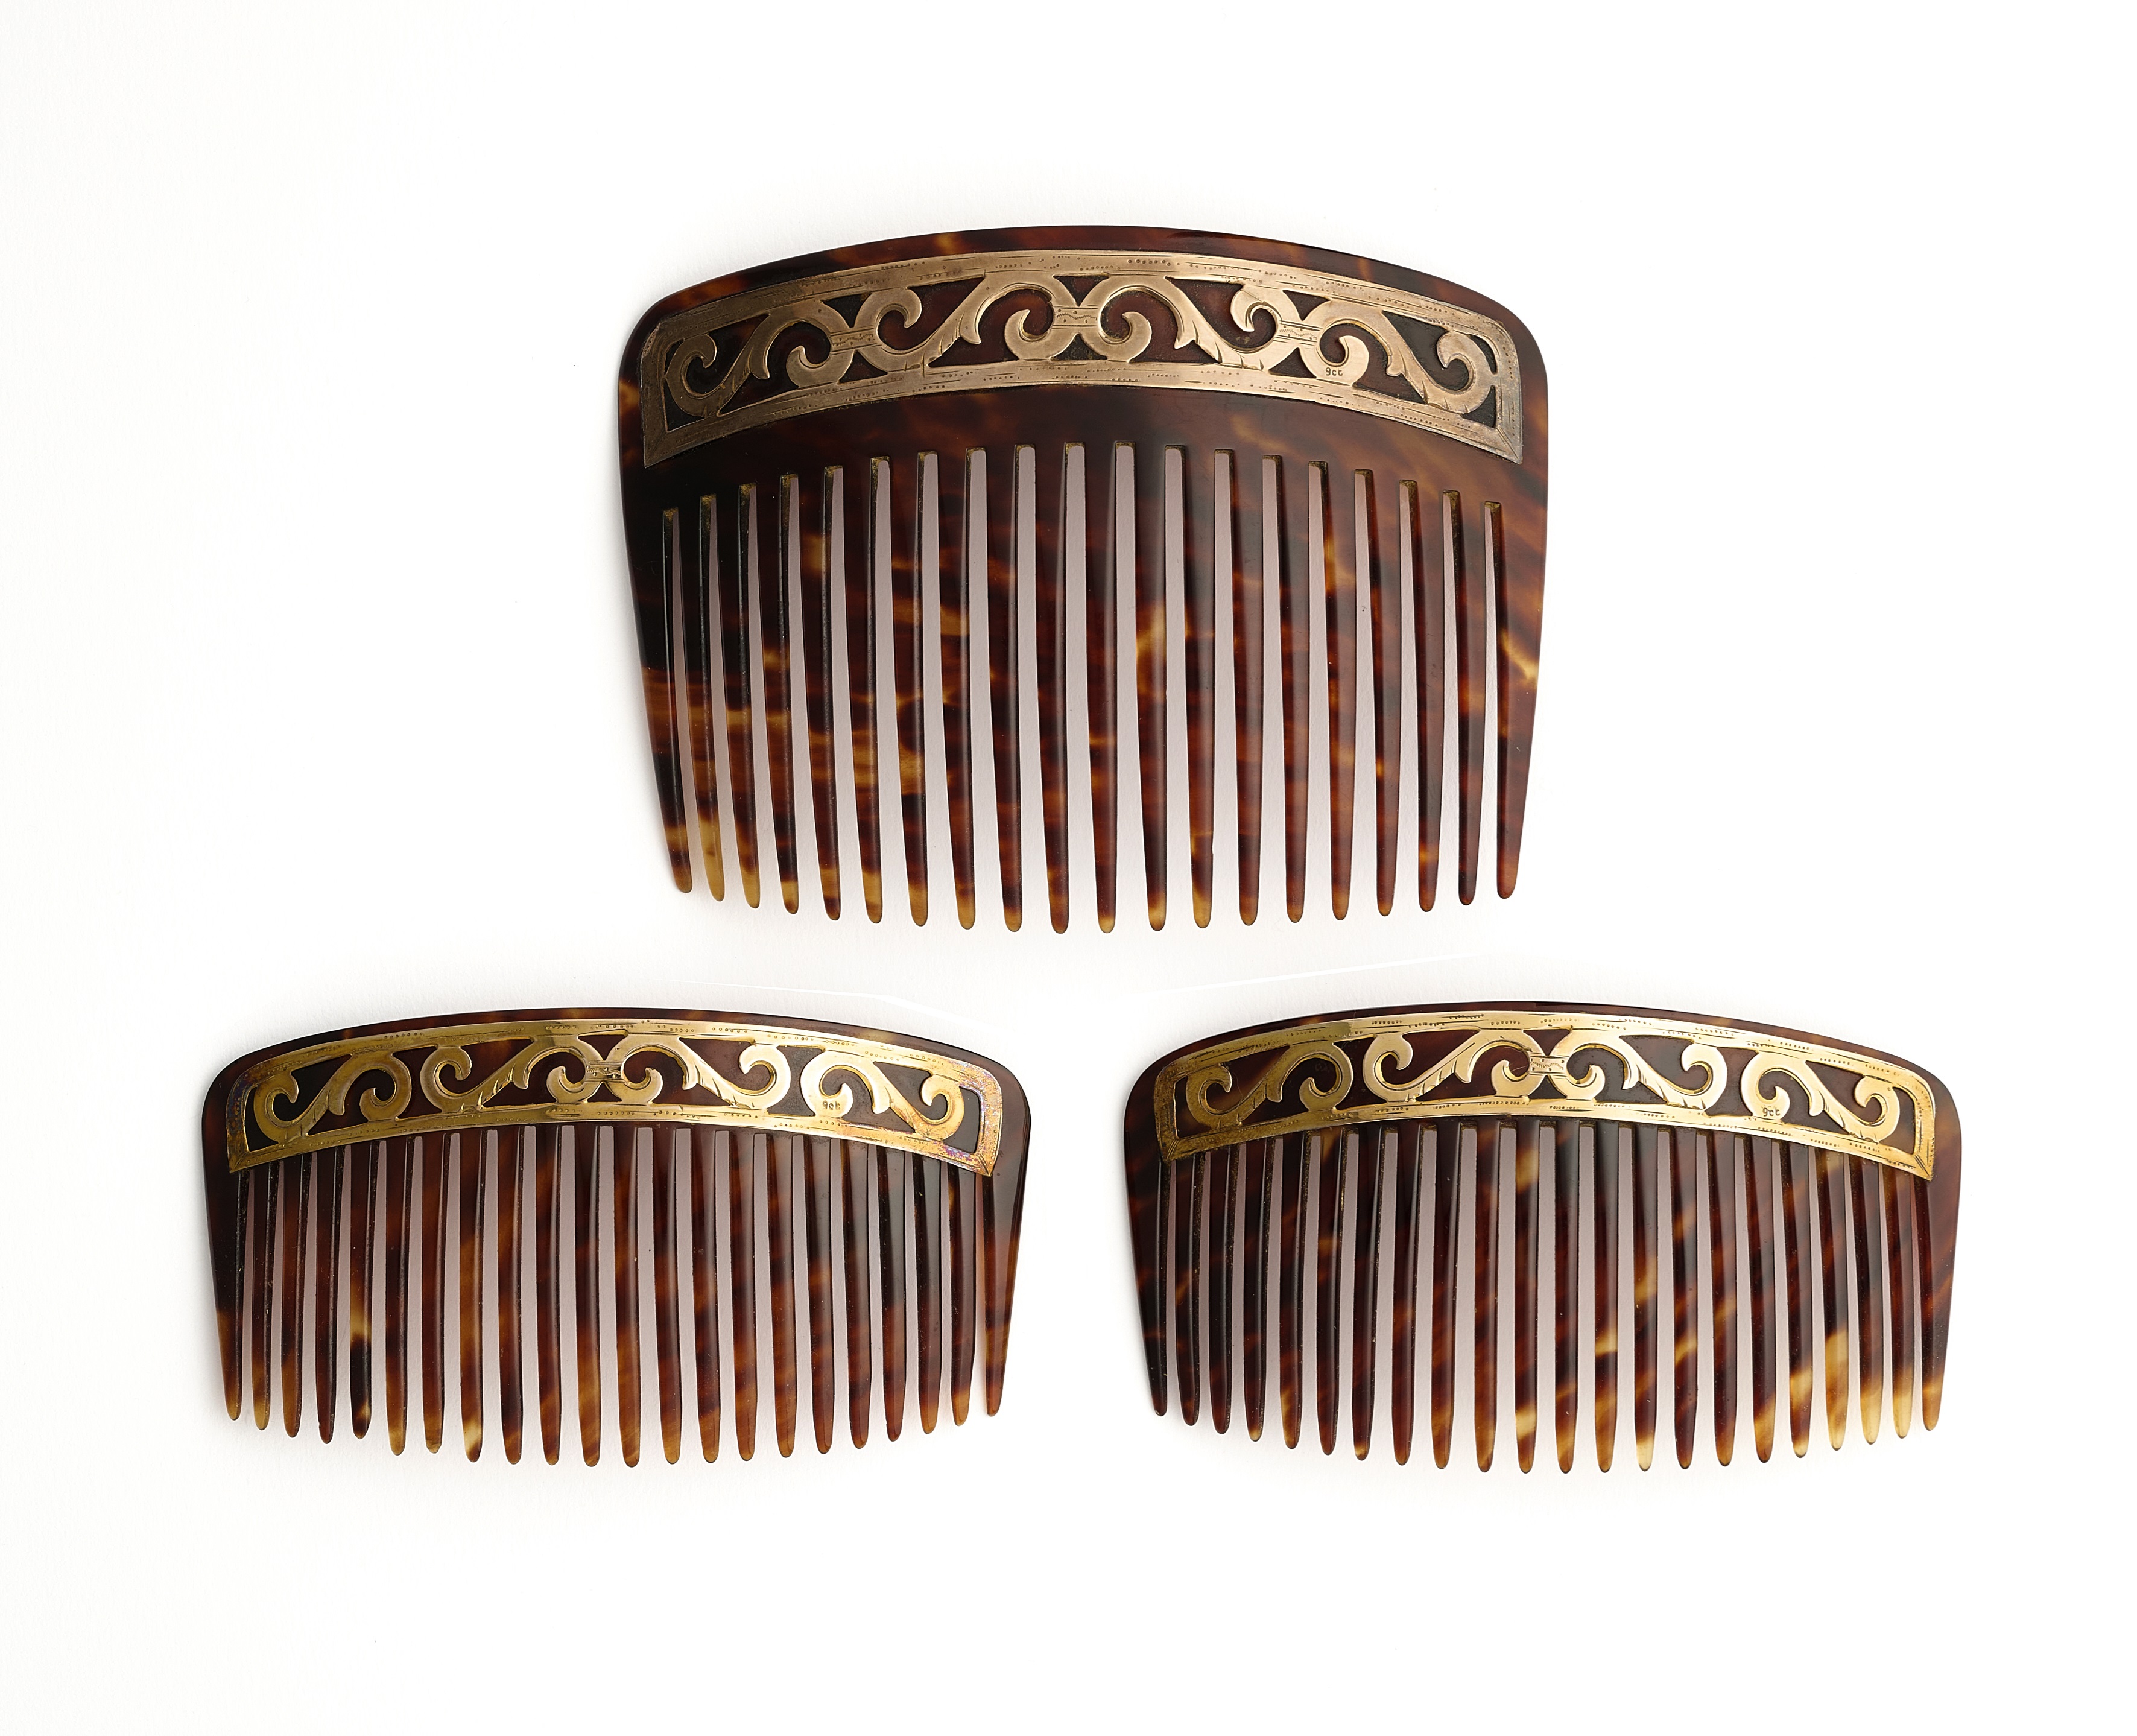 ˜ □ A SET OF THREE EDWARDIAN TORTOISESHELL AND GOLD HAIR COMBS, 1900s